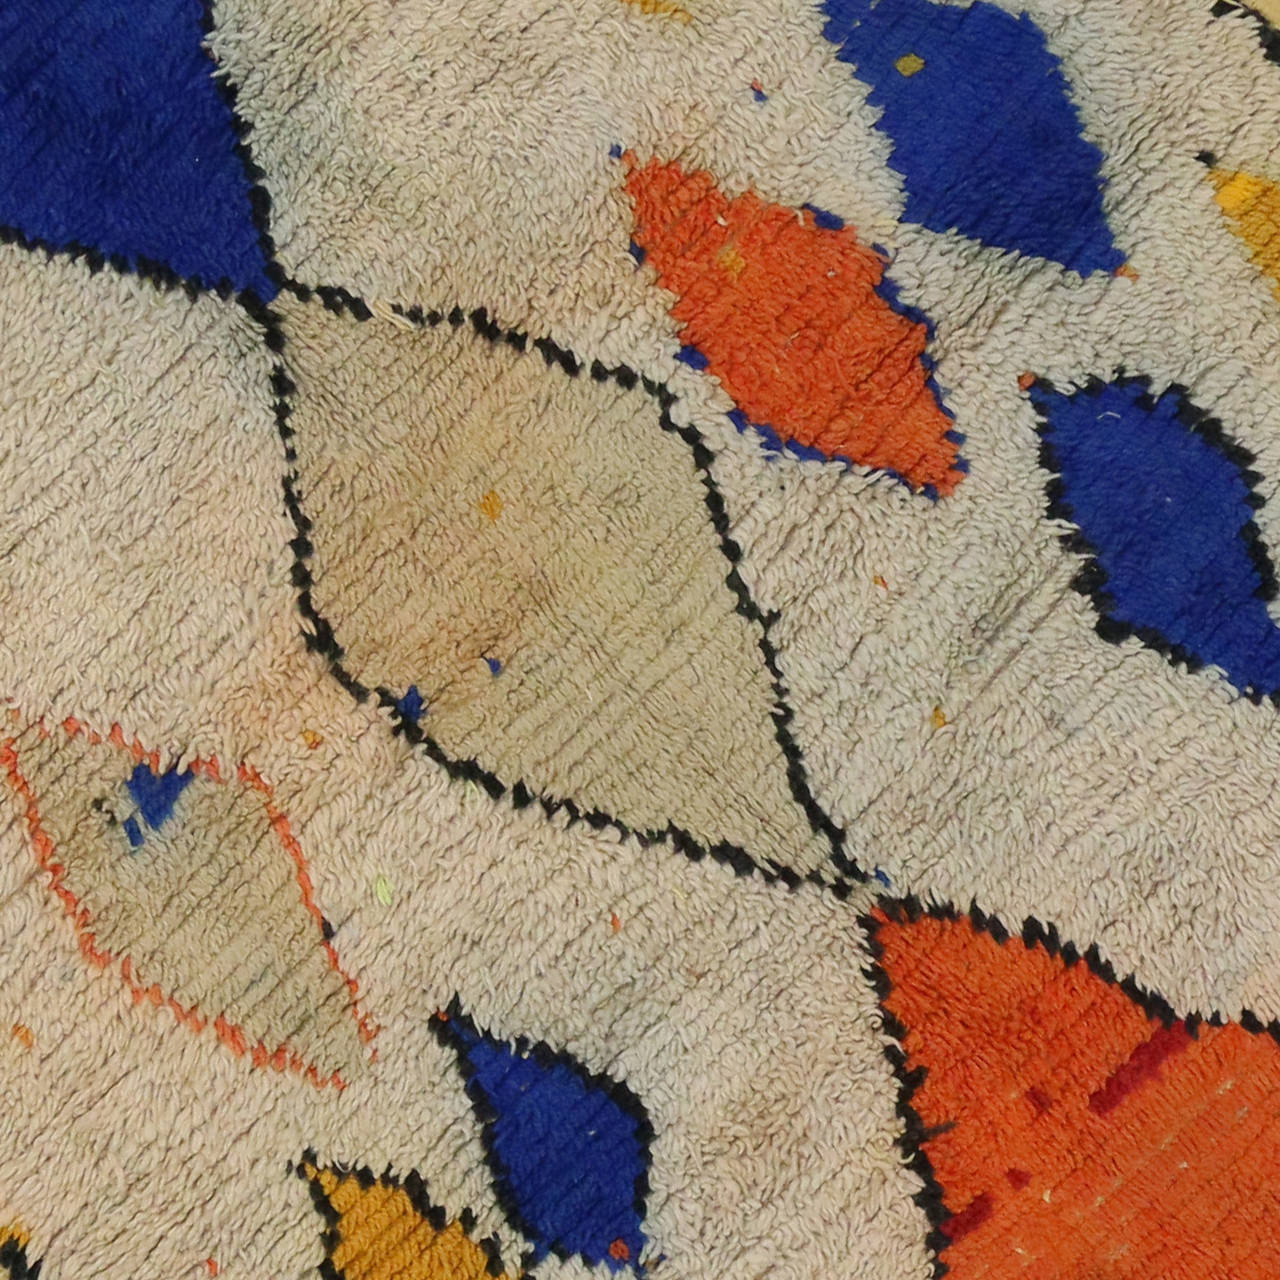 Transform your interior space into a Moroccan delight with this vintage Moroccan rug. With an energetic color palette consisting of orange, blue, yellow and black on a field of ivory represents the contemporary, yet authentic creative and archaic